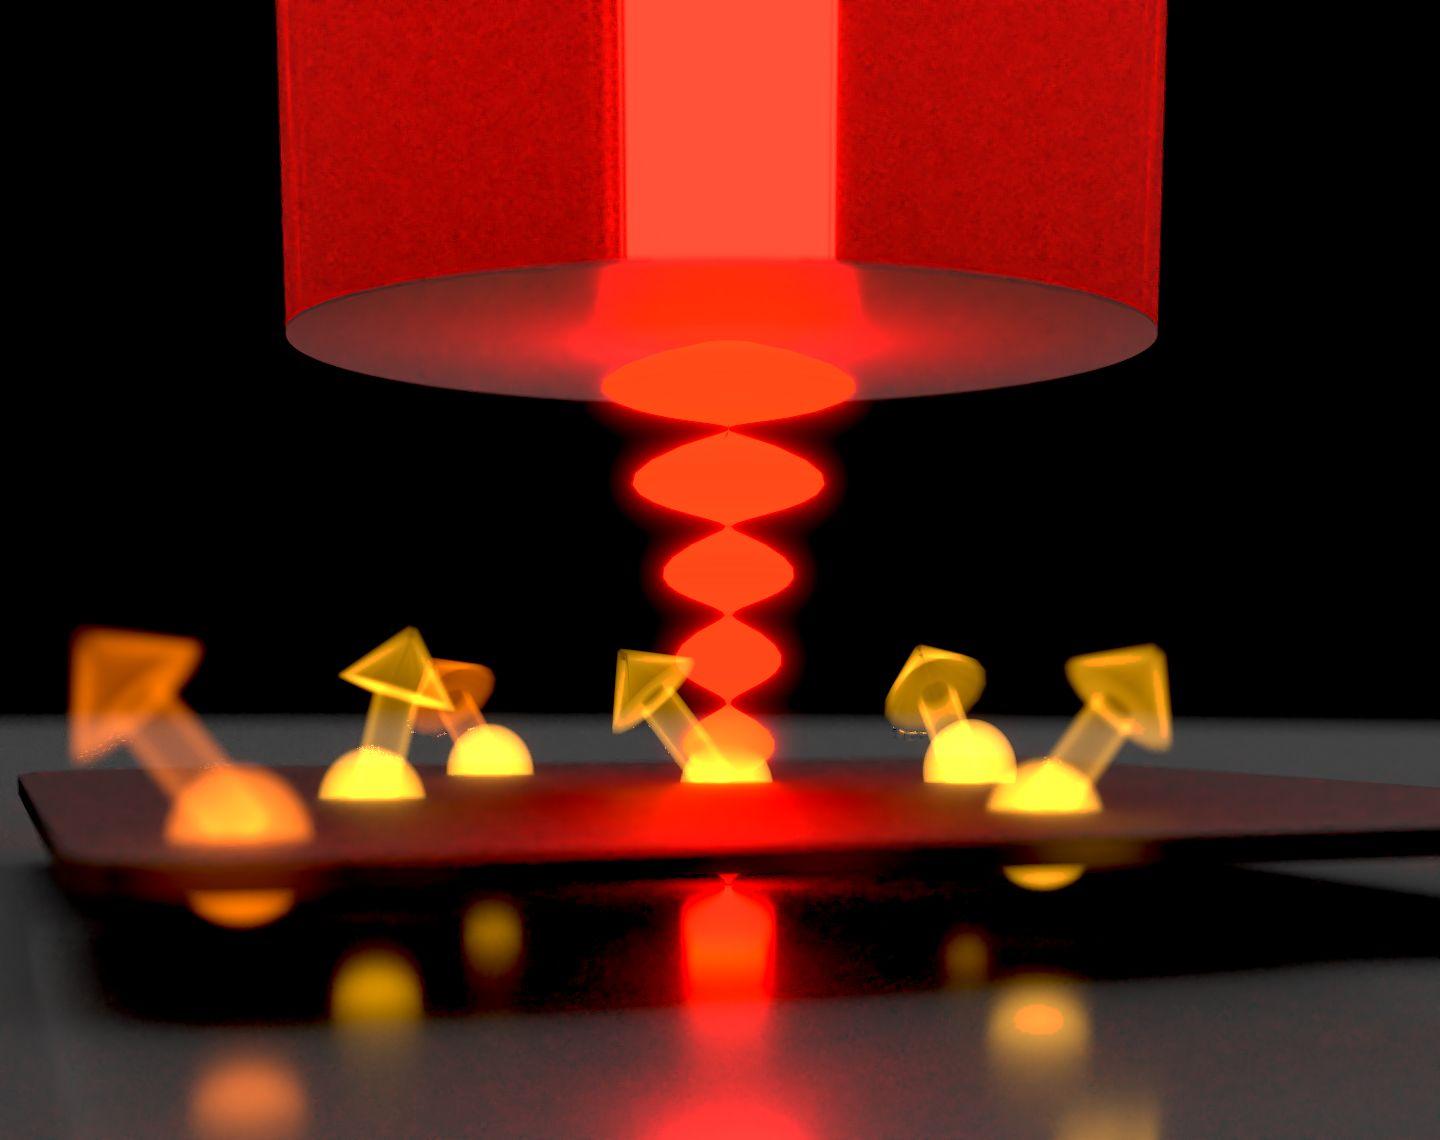 In an initiative called the Scalable Rare Earth Ion Quantum Computing Nodes (SQUARE) project, researchers at Karlsruhe Institute of Technology (KIT) are investigating materials for multifunctional quantum bits (qubits). 